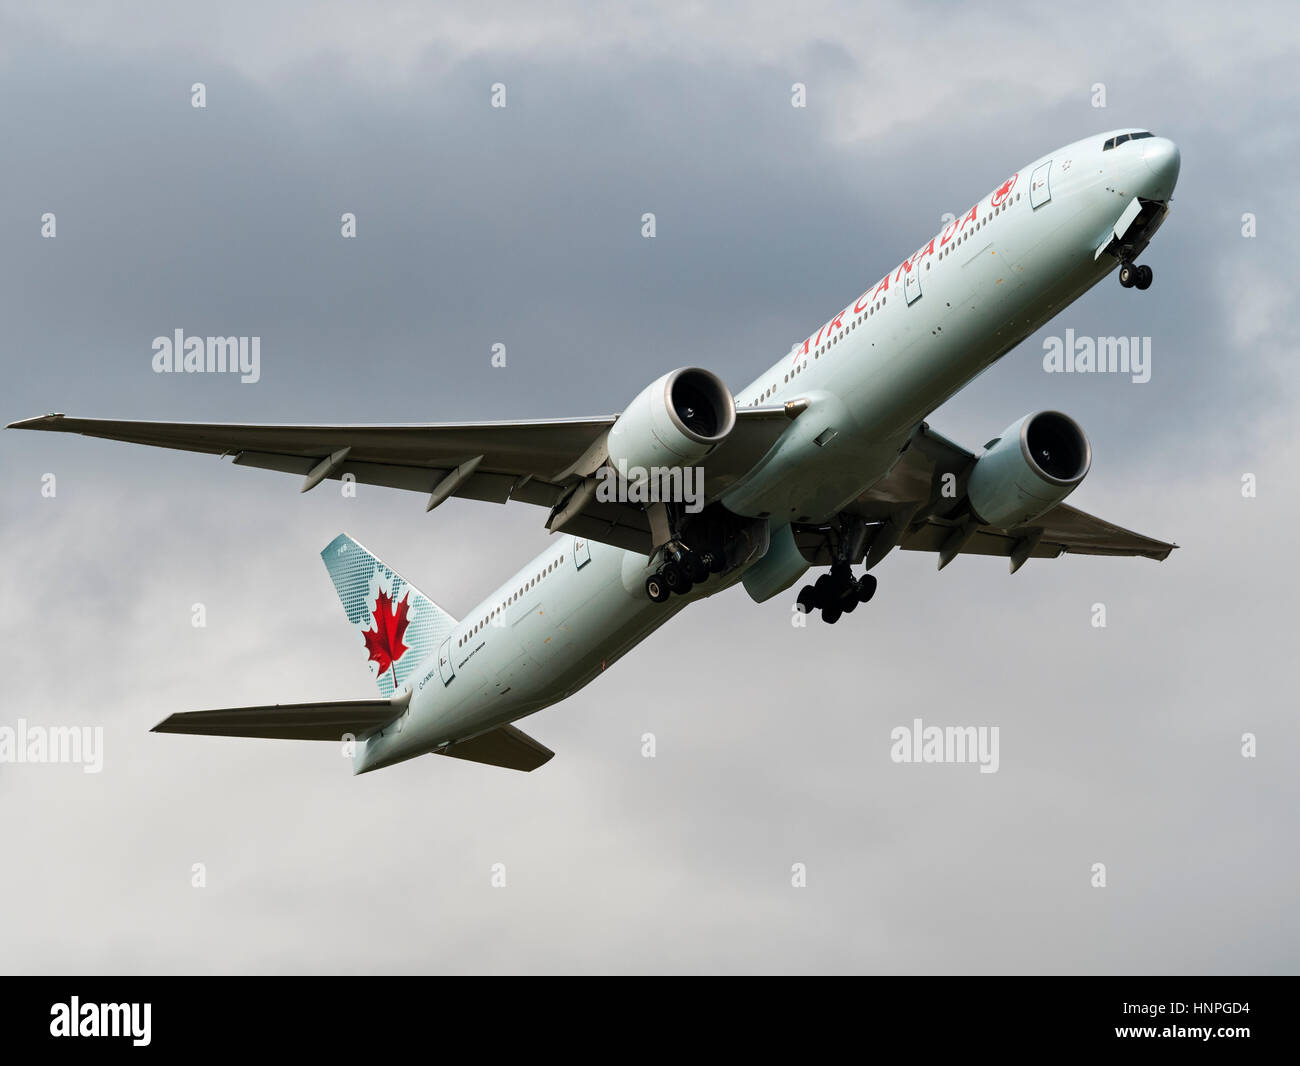 An Air Canada Boeing 777-300ER (C-FNNU) wide-body jet airliner airborne after take off from Vancouver International Airport, Canada Stock Photo